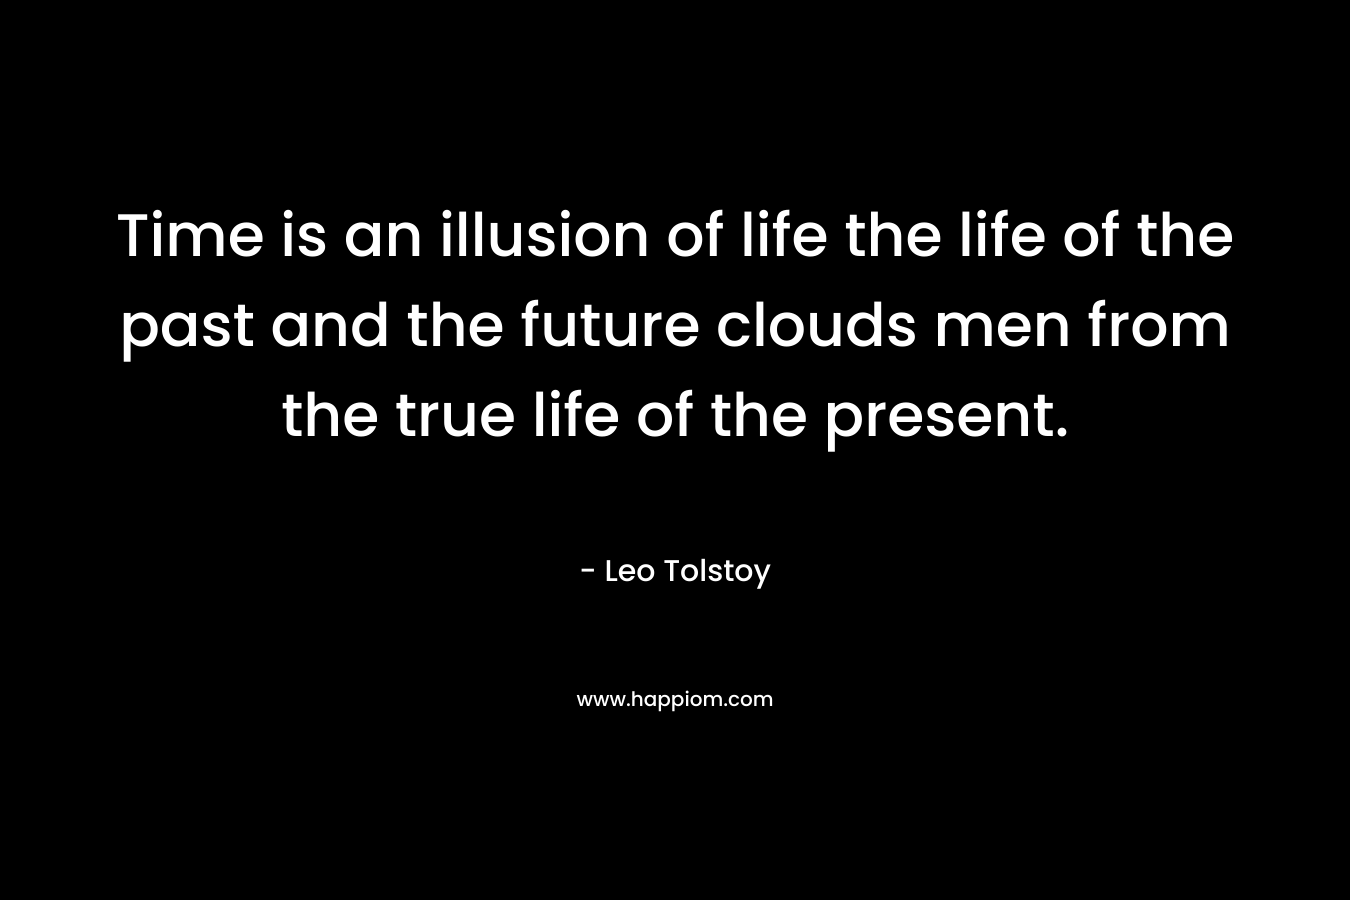 Time is an illusion of life the life of the past and the future clouds men from the true life of the present. 